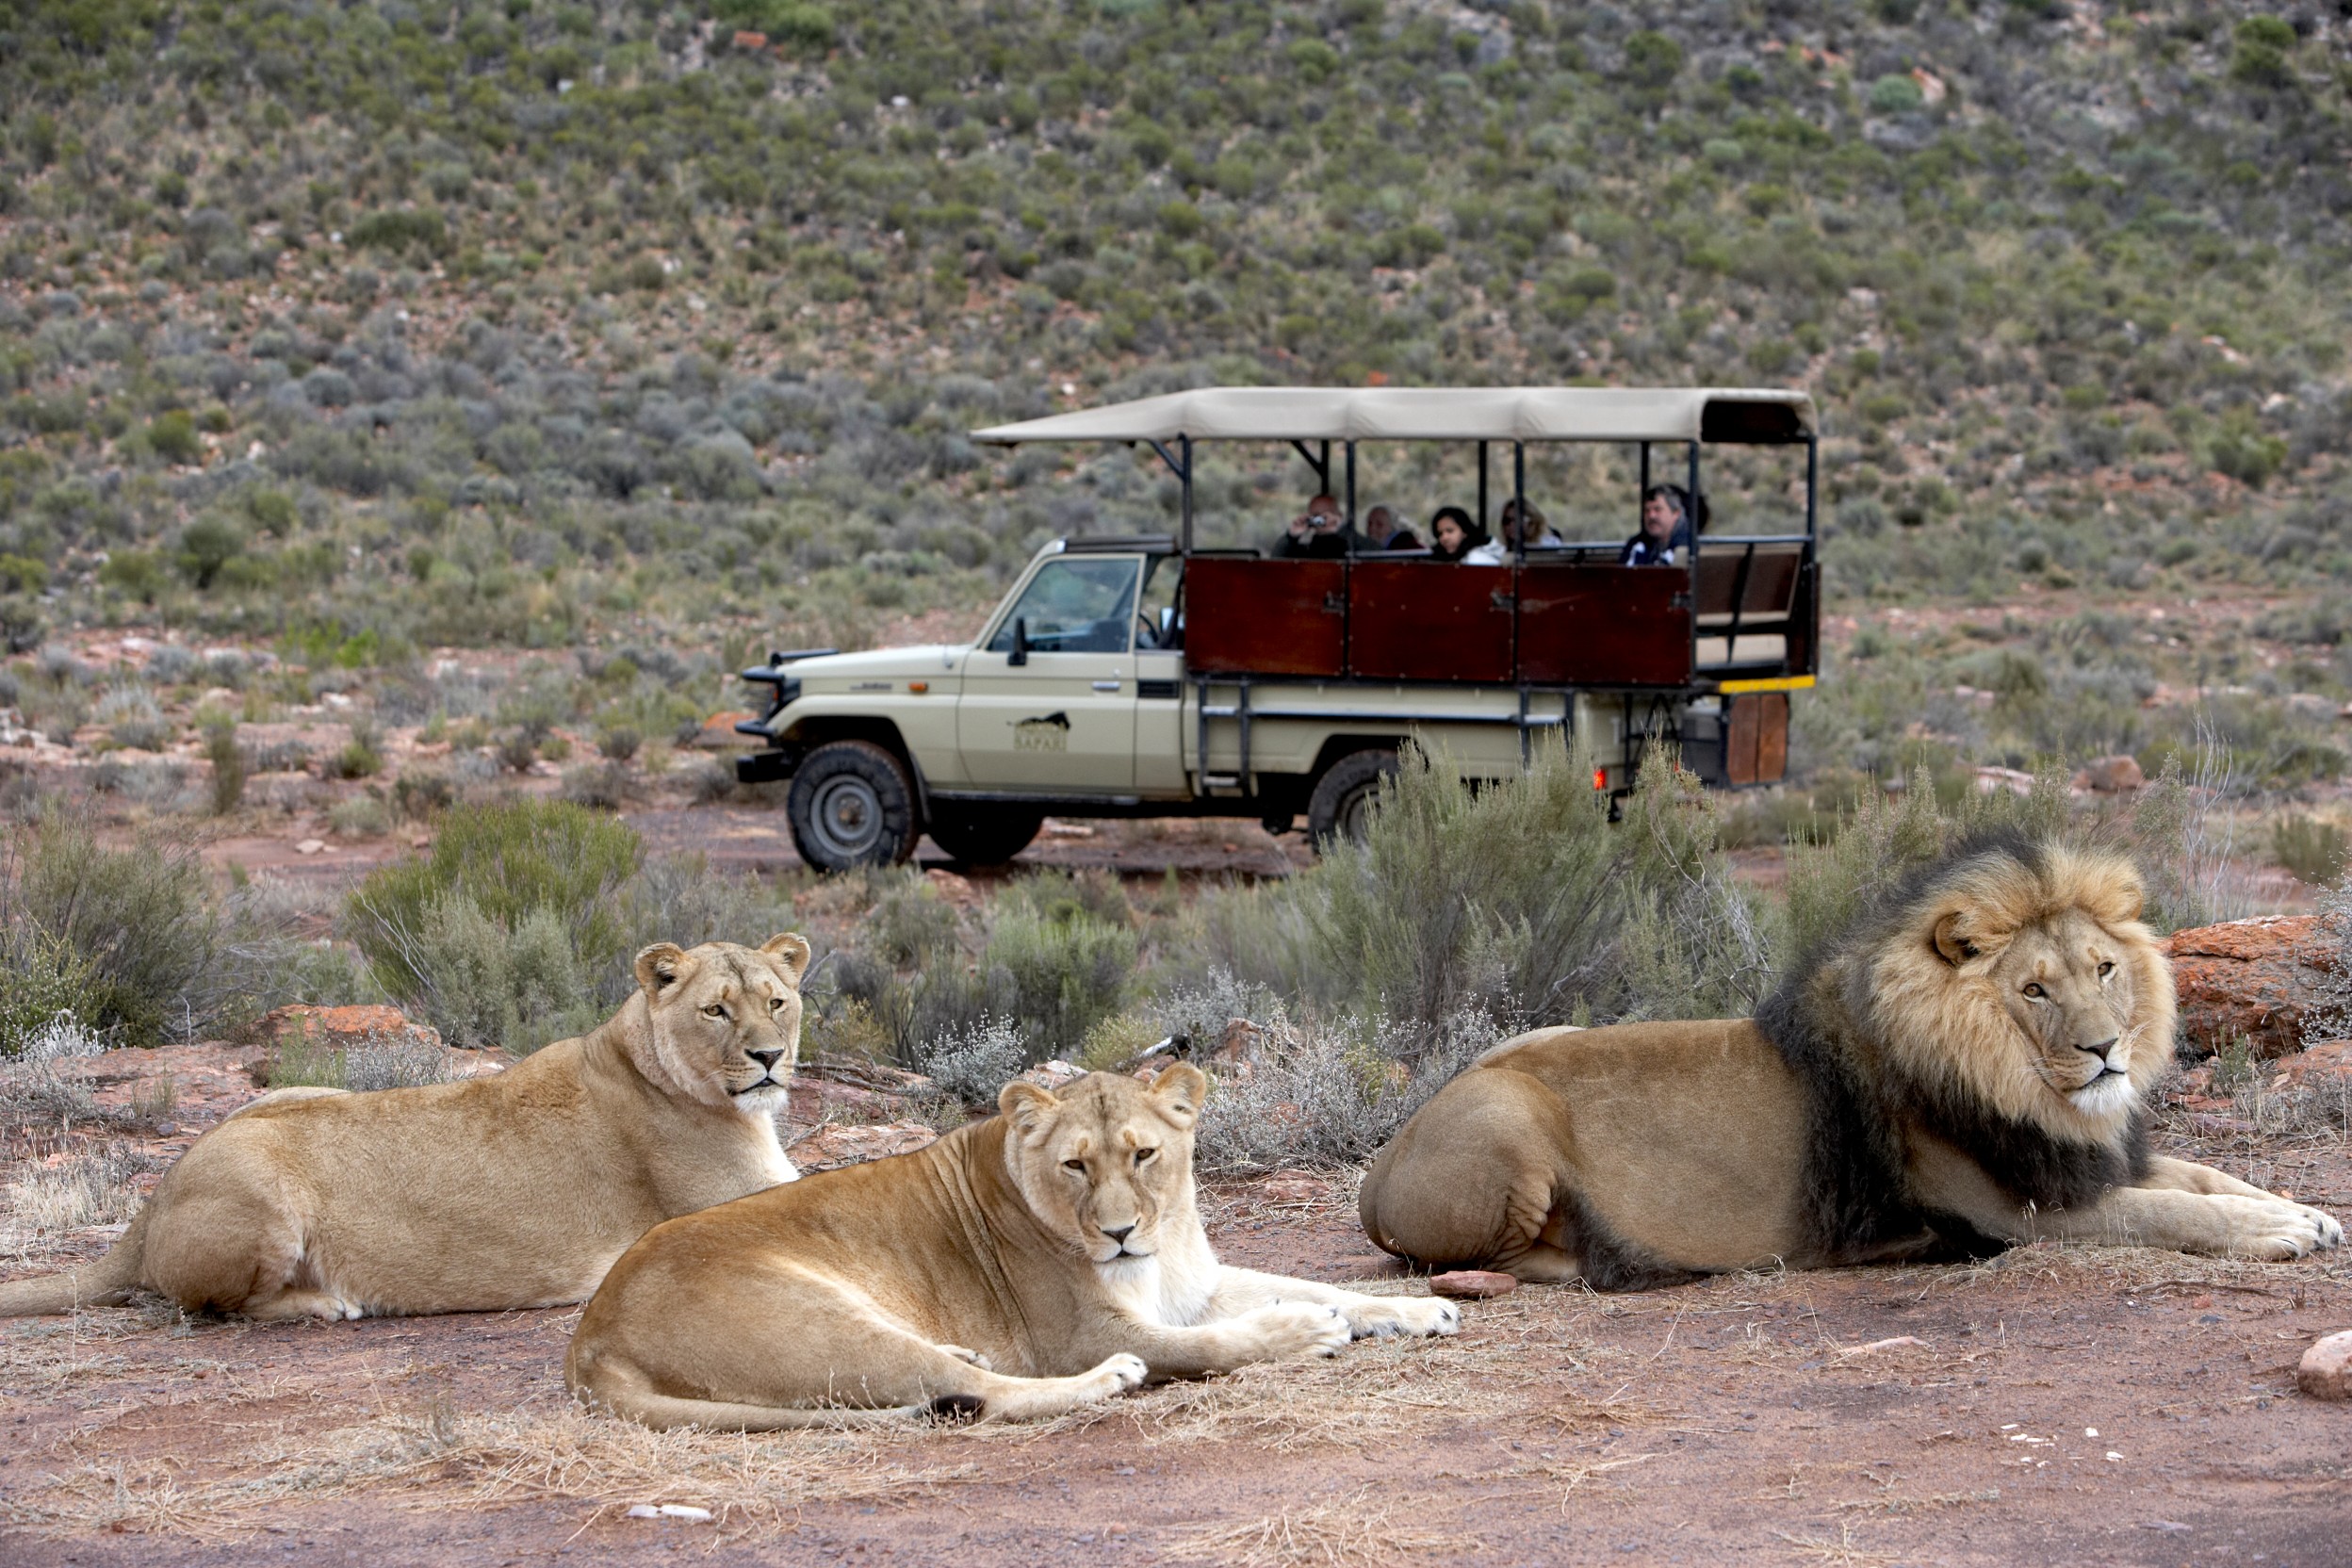 One Day Cape Town Safari Tours and Experiences in South Africa